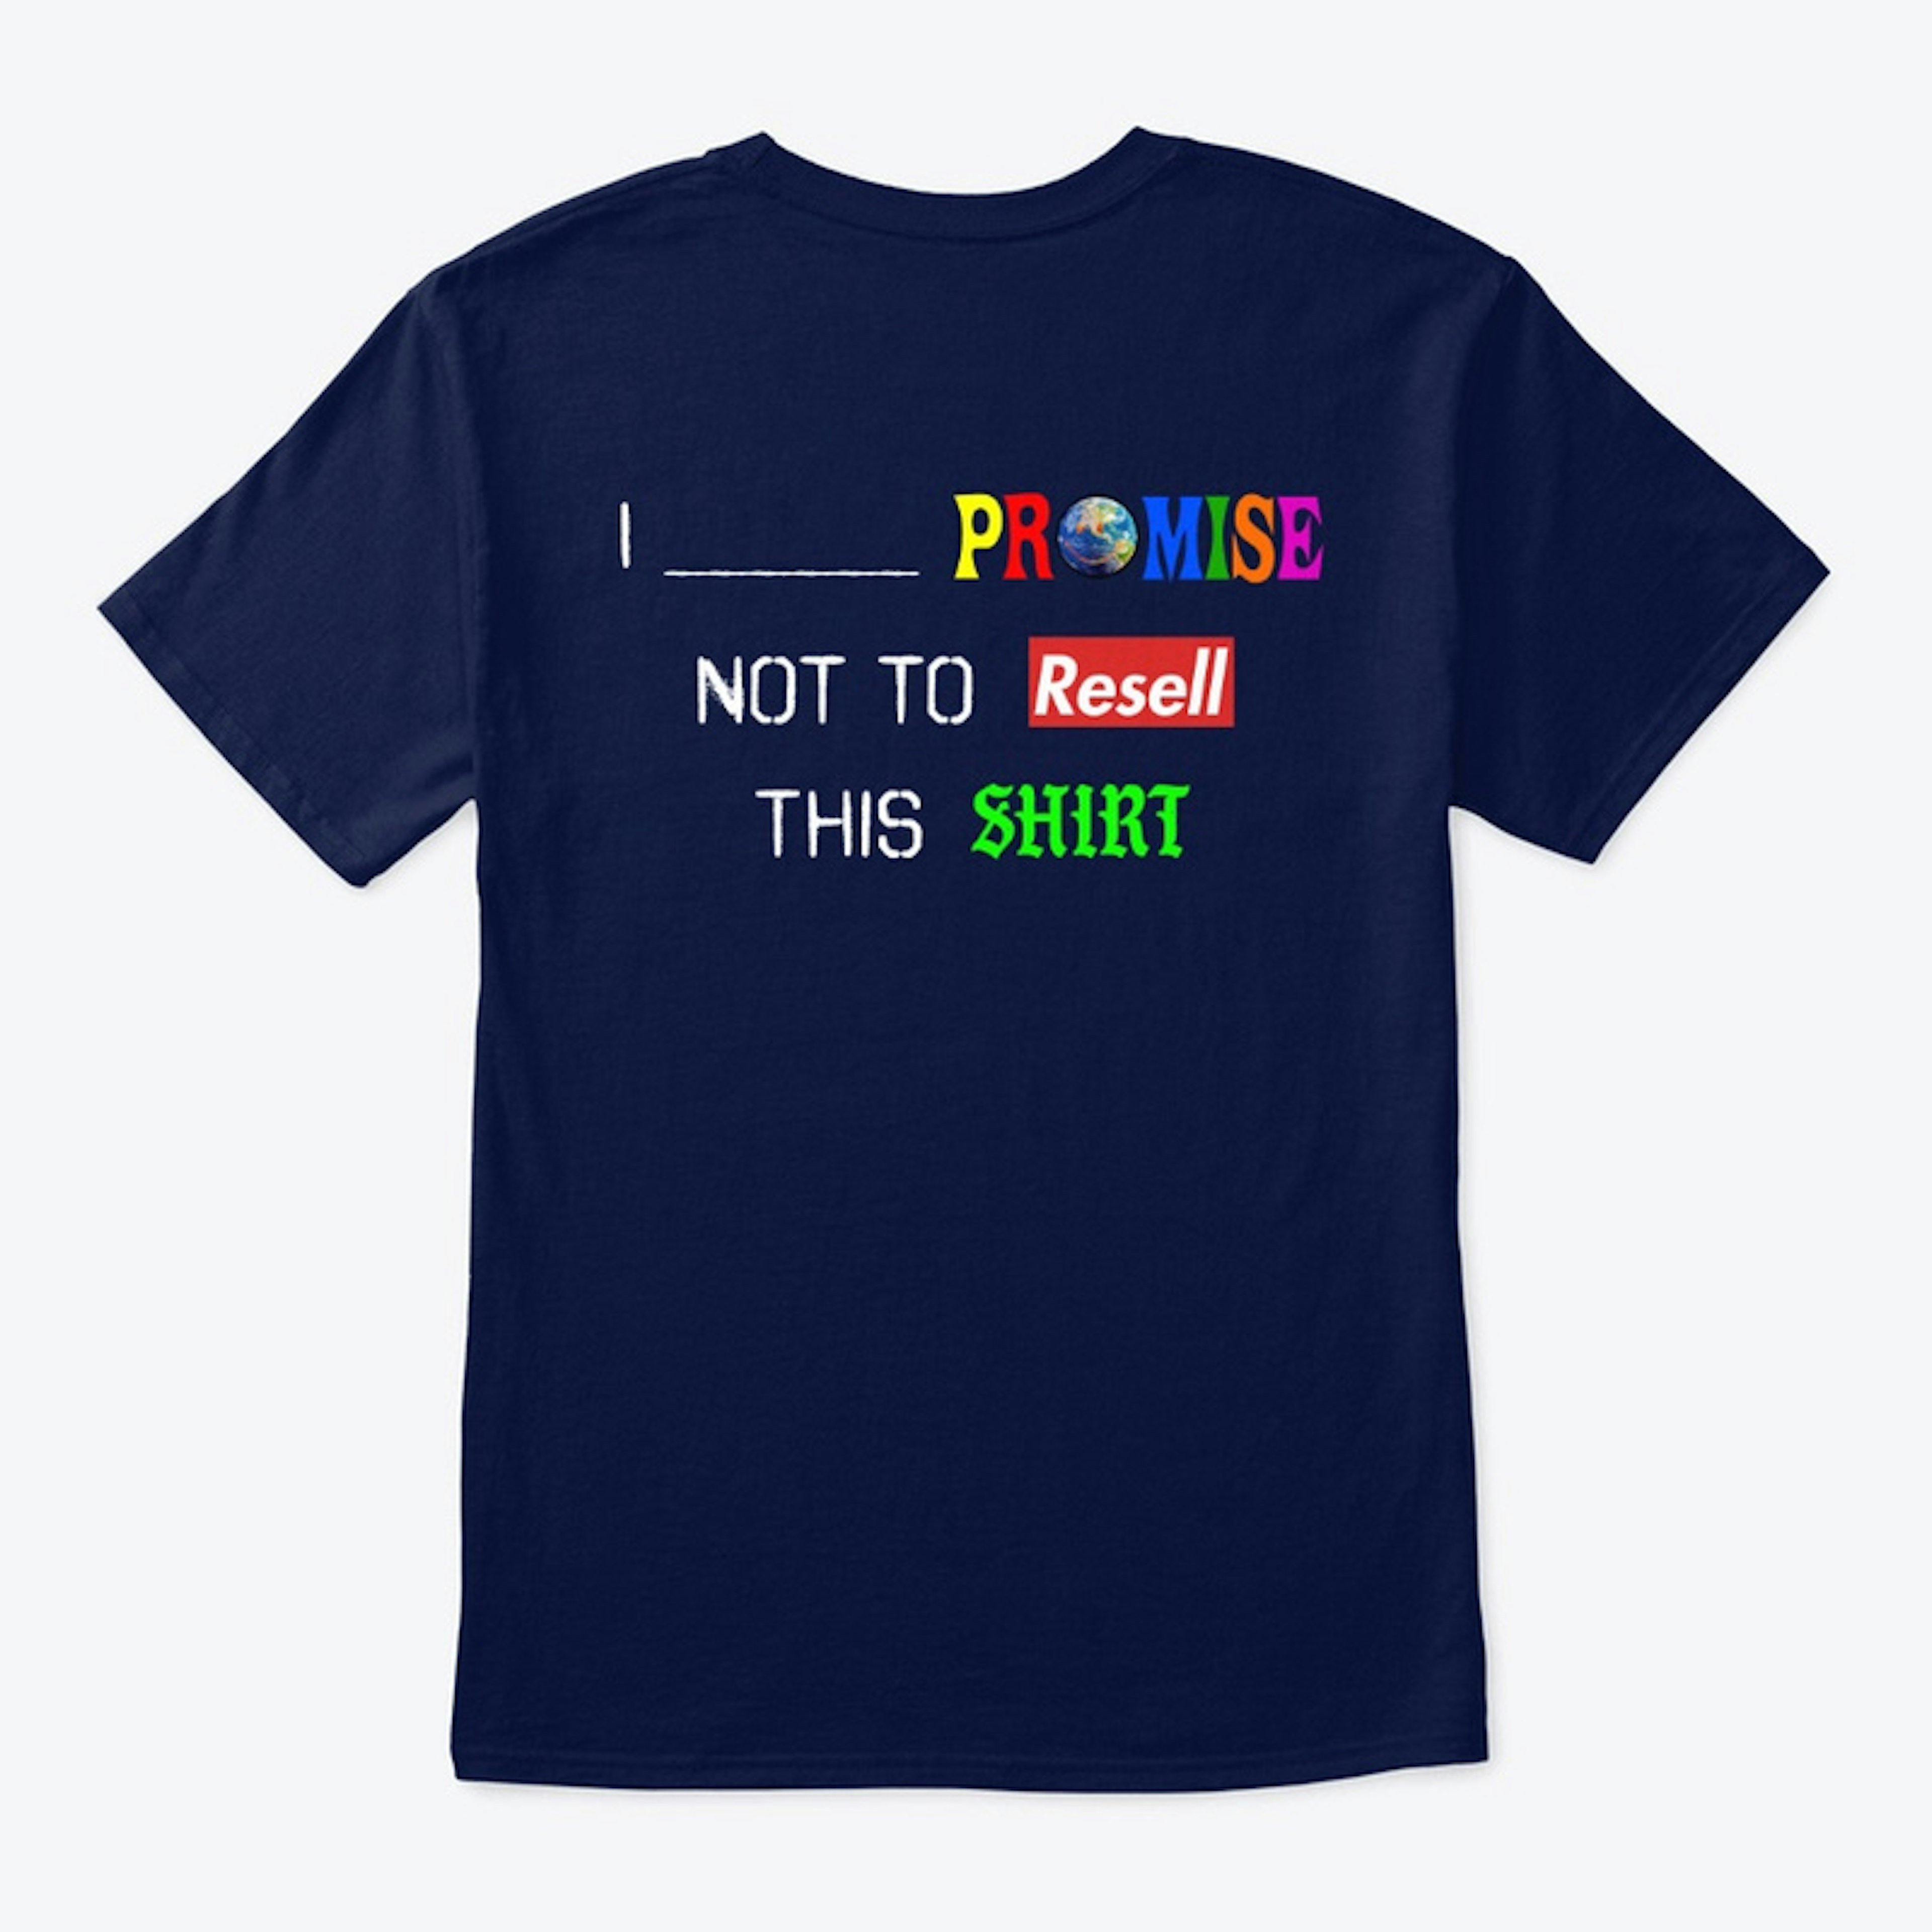 The I Promise Tee